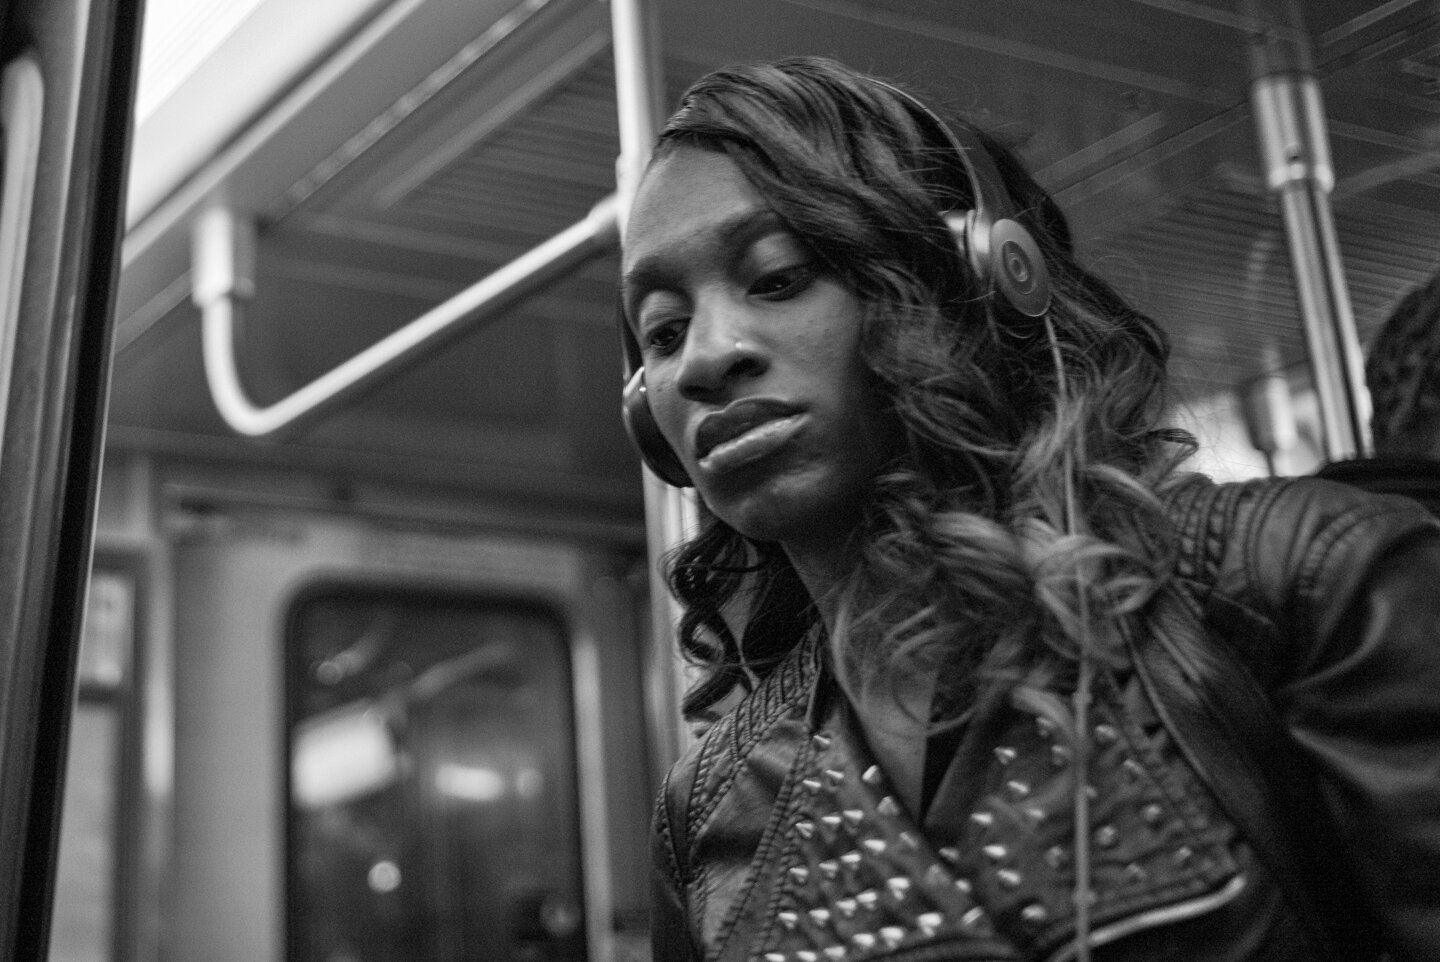 Woman with Headphones. Hunters Point, New York 2015